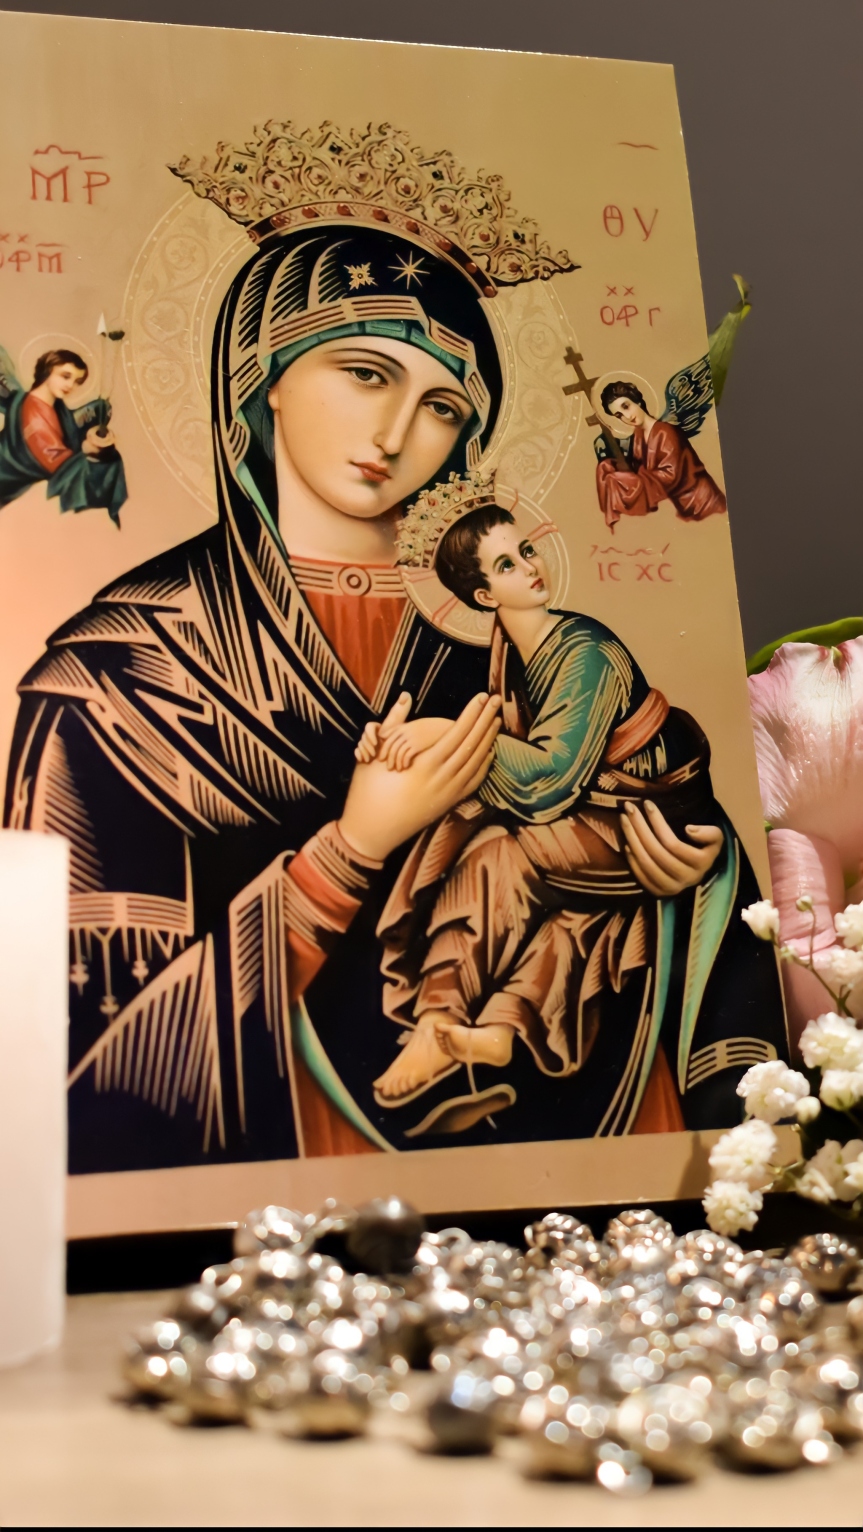 Our Lady of Perpetual Help